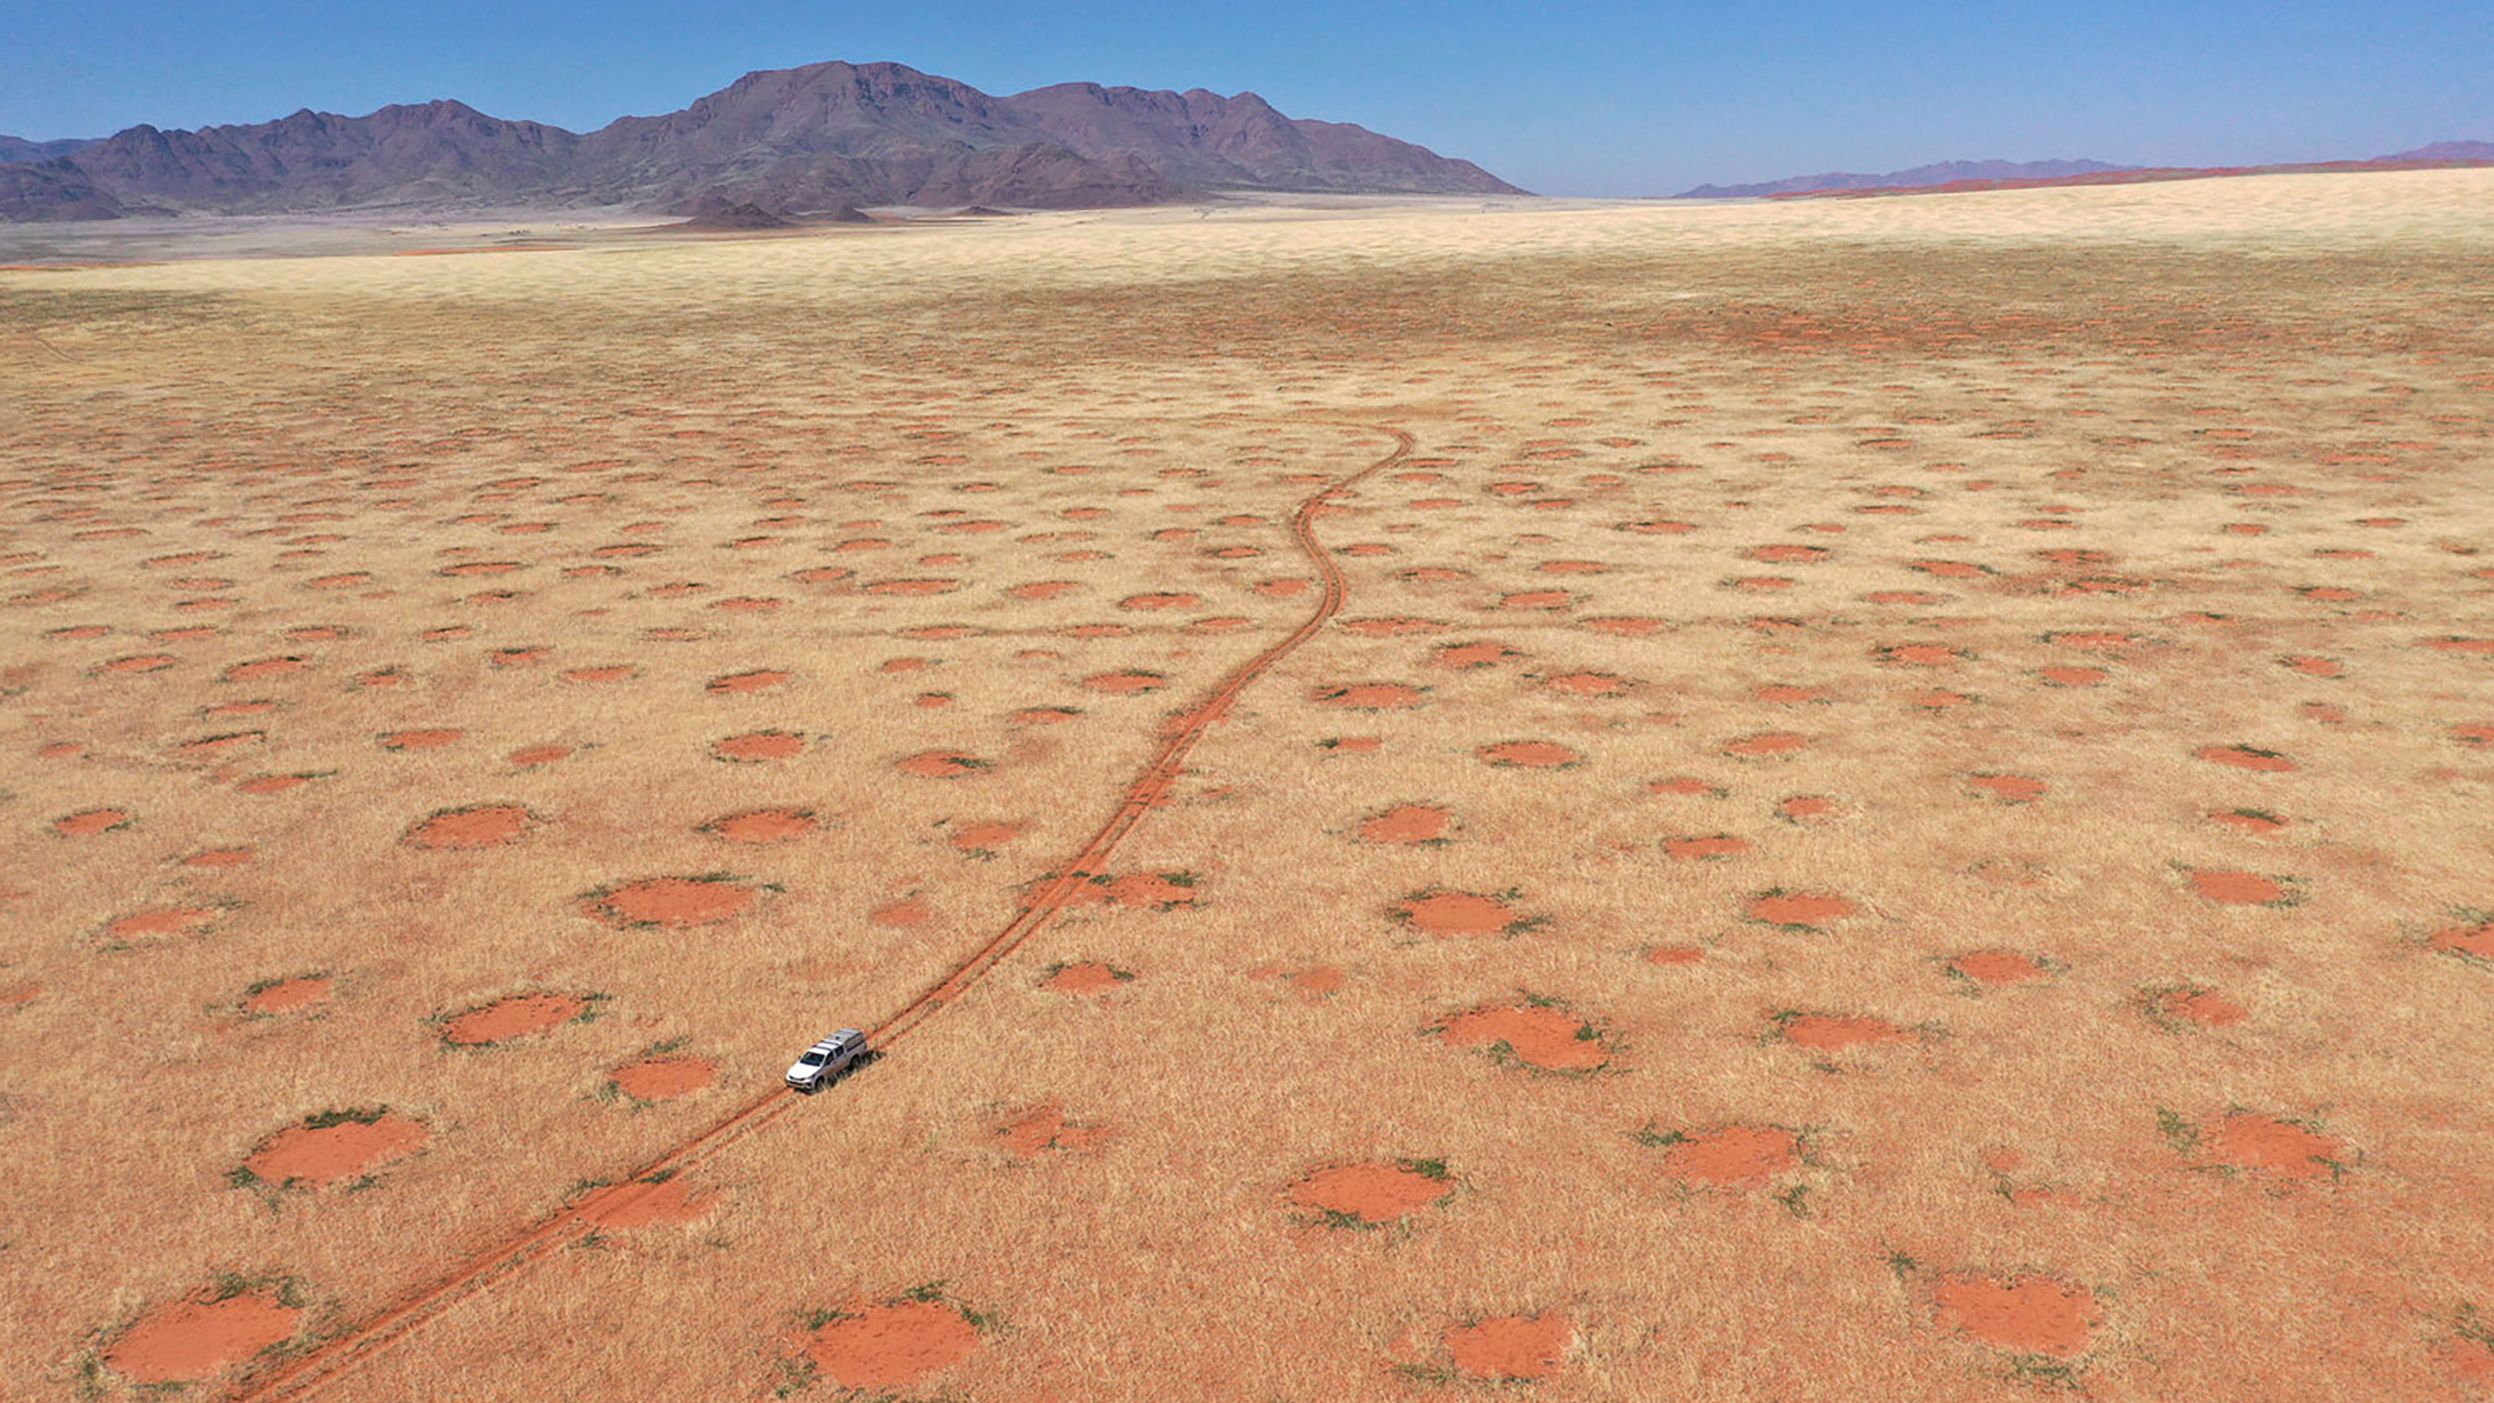 An April 2022 drone image shows the NamibRand Nature Reserve, one of the regions in Namibia where researchers undertook grass excavations, soil-moisture and infiltration measurements.